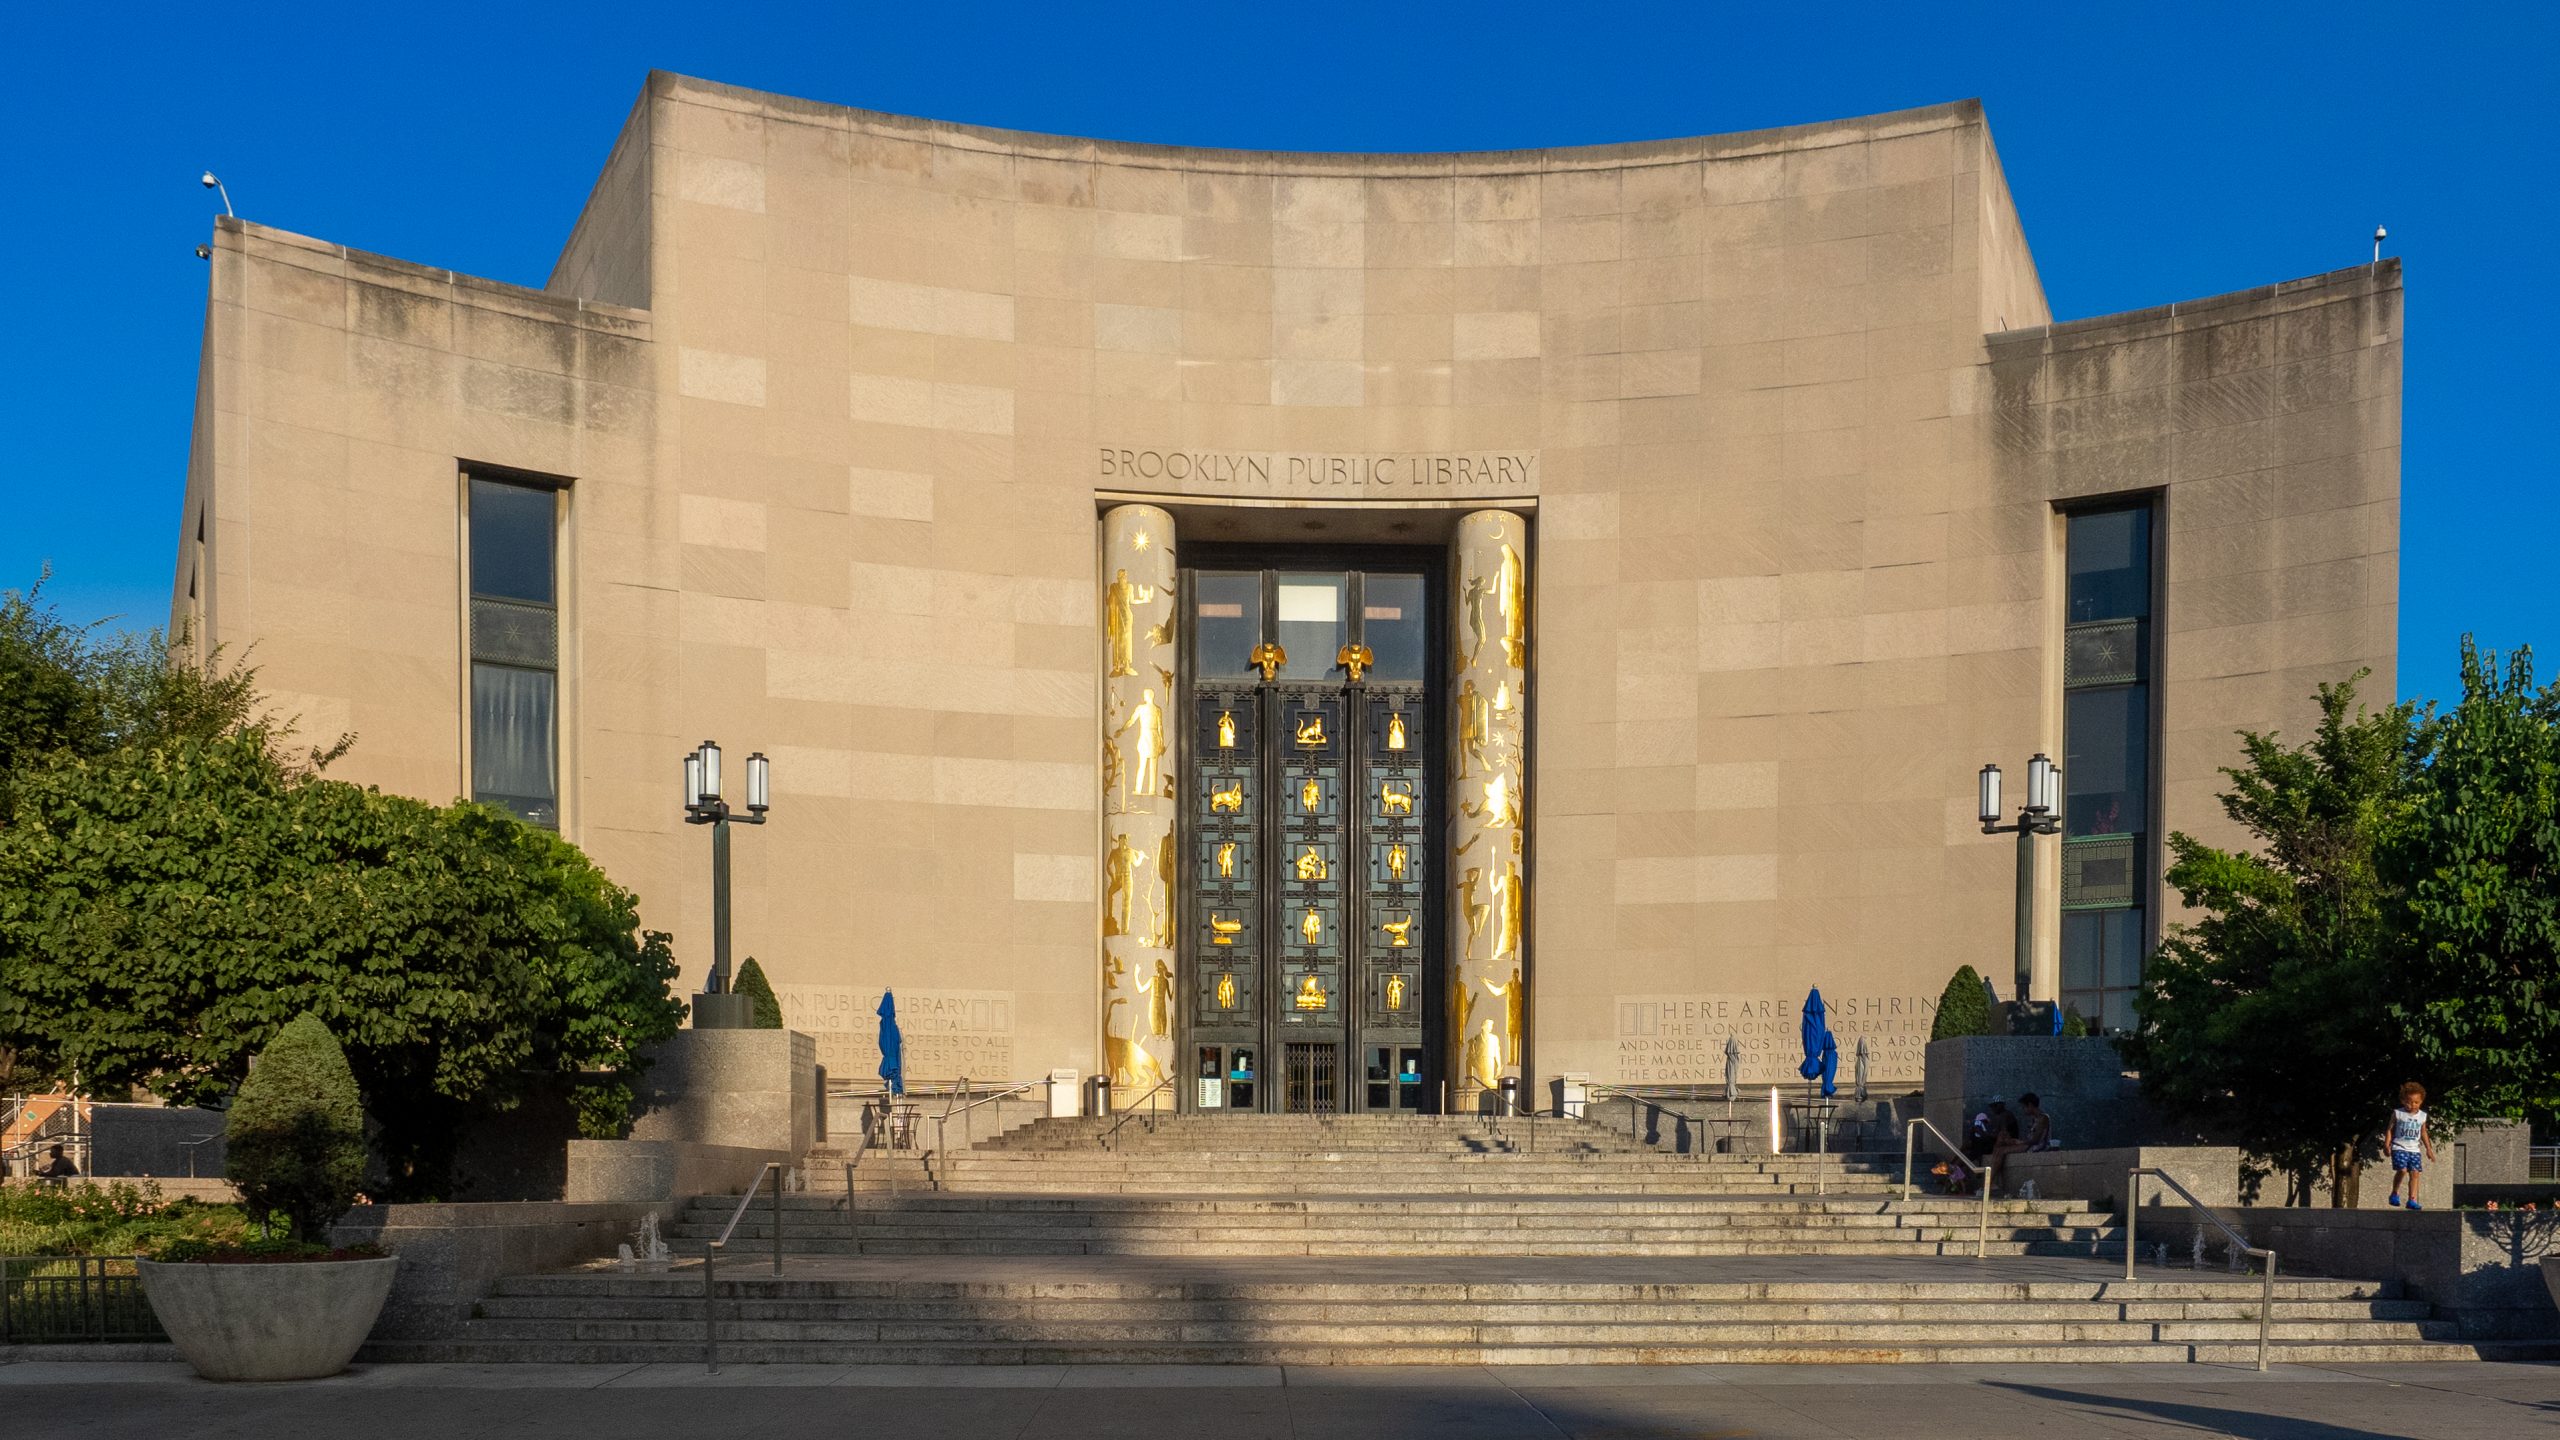 The Central Library at Grand Army Plaza